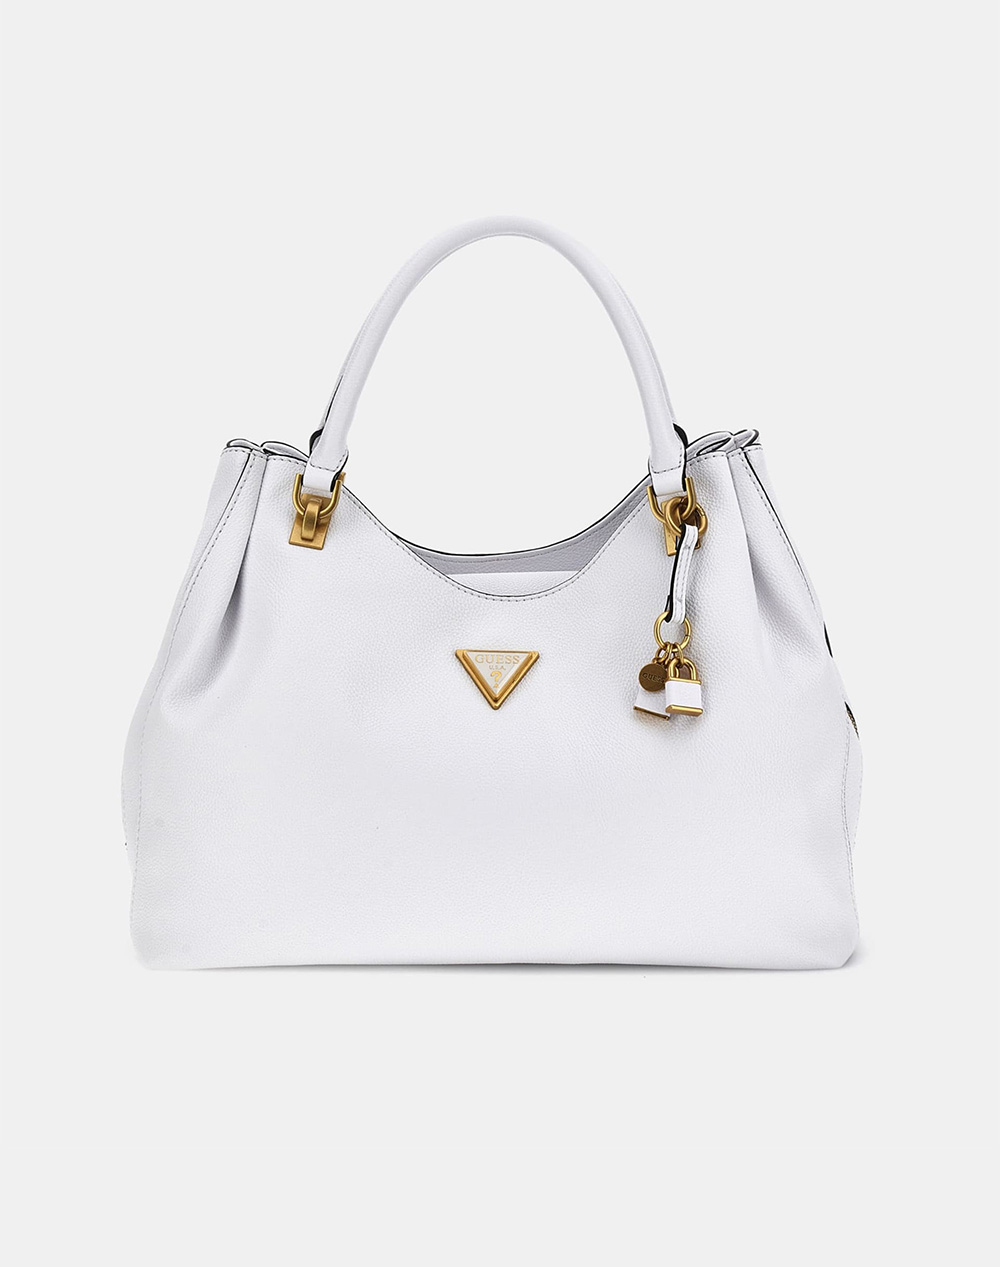 GUESS COSETTE GIRLFRIEND CARRYALL ΤΣΑΝΤΑ ΓΥΝΑΙΚΕΙΟ HWVA9222230-WHI White 3810AGUES6200901_7001